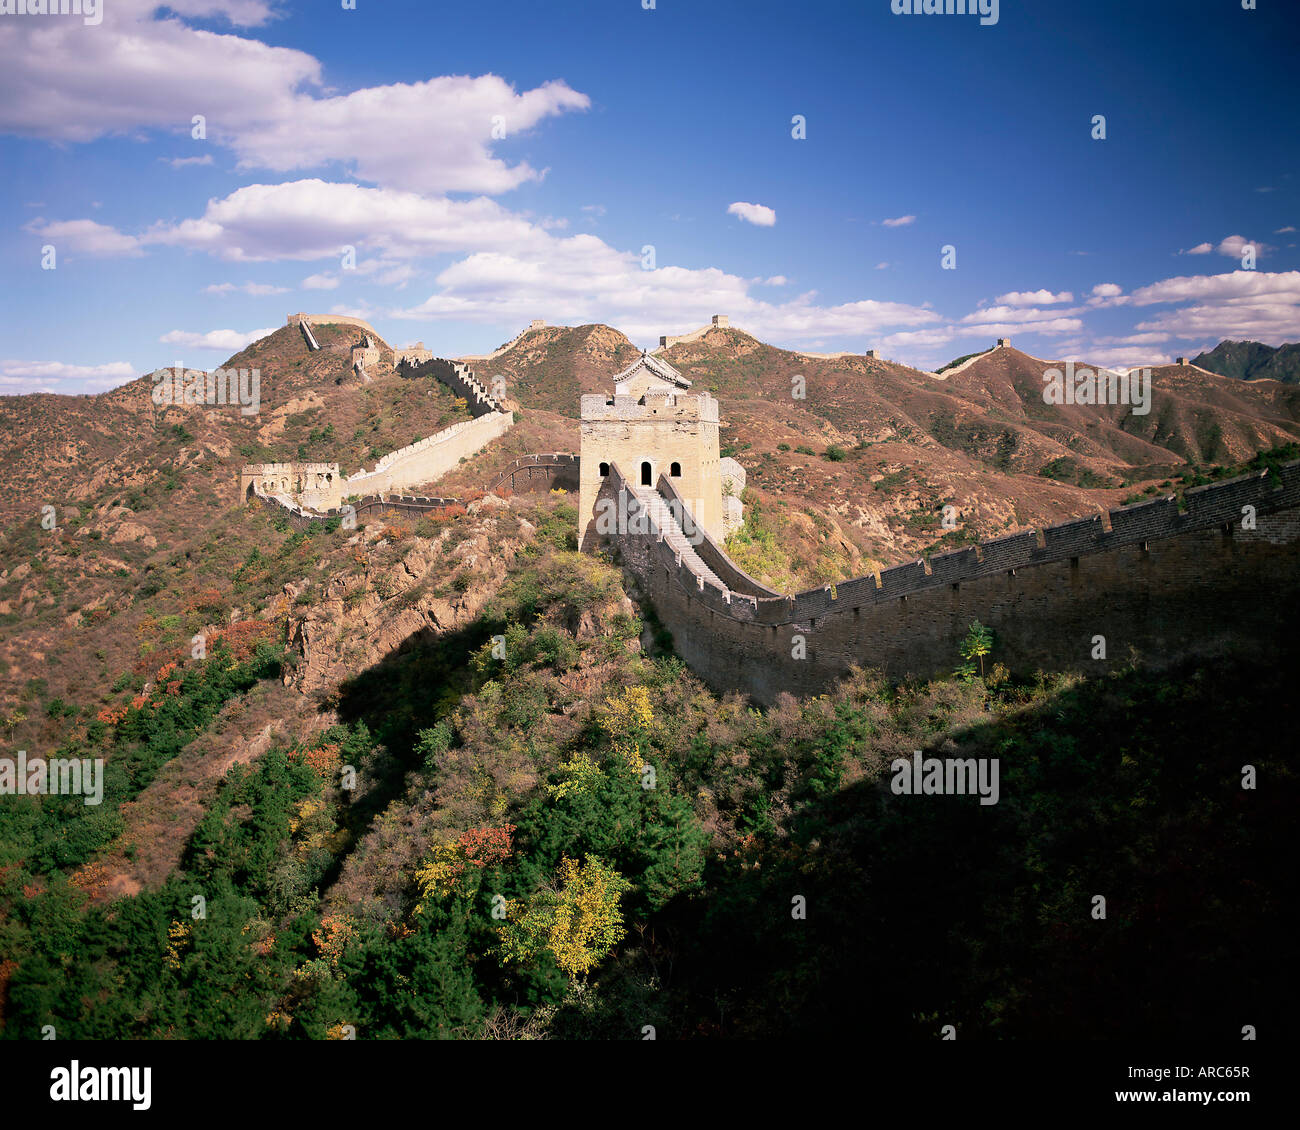 Jinshanling section of the Great Wall of China, UNESCO World Heritage Site, near Beijing, China, Asia Stock Photo